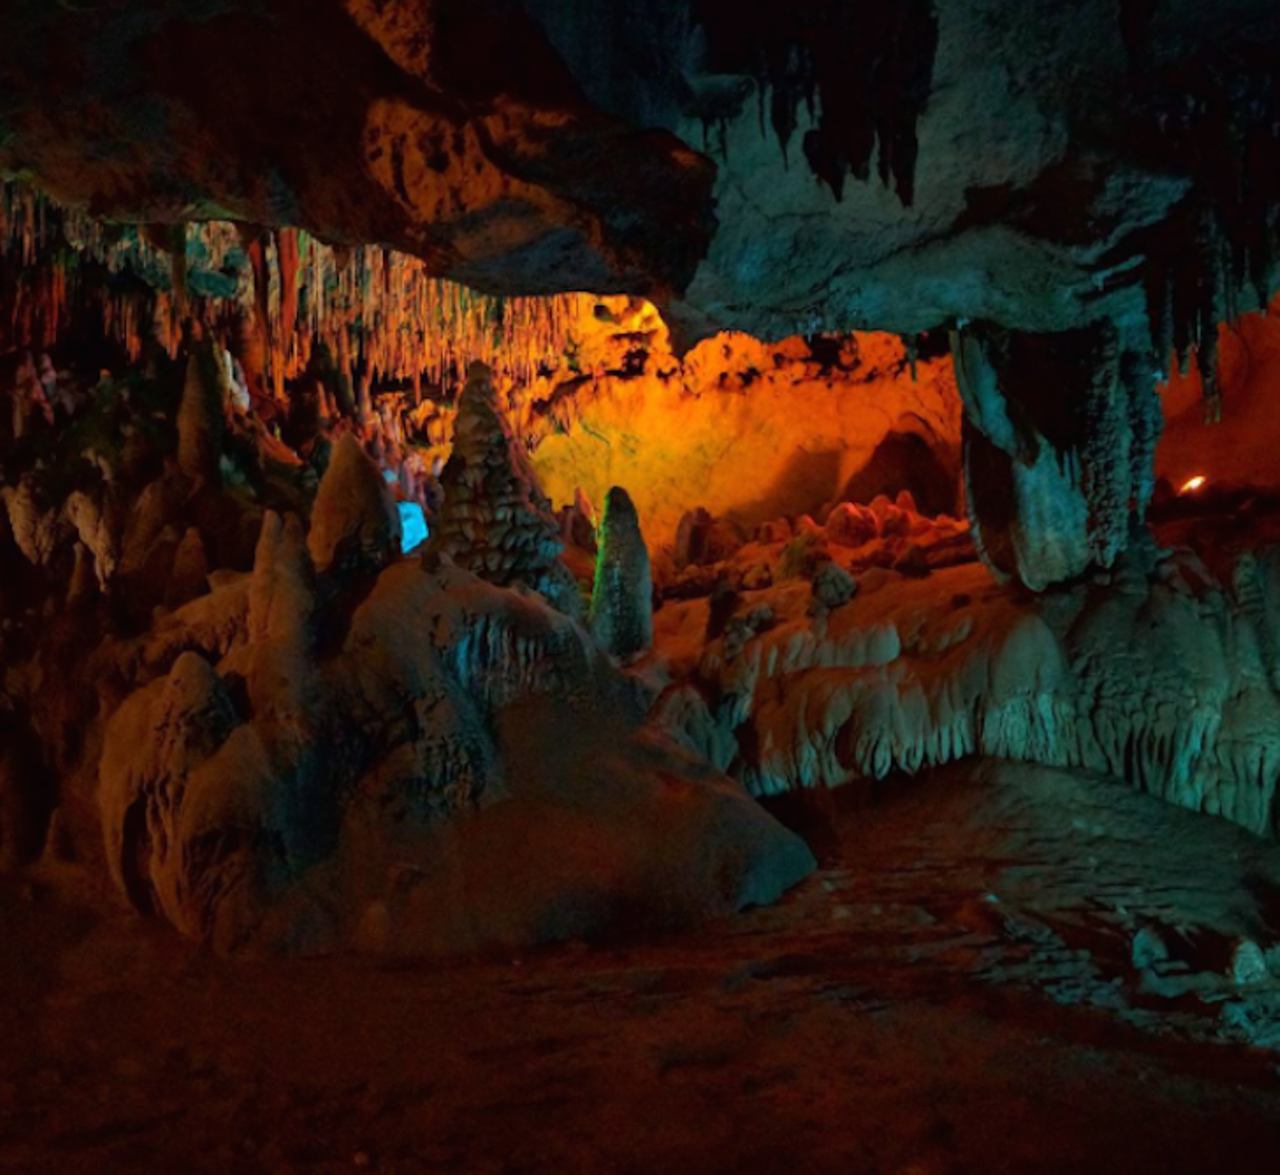 Florida Caverns State Park
3345 Caverns Road, Marianna | 850-482-1228
At the famed Florida Caverns, prepare for limestone stalactites, stalagmites, soda straws, flowstones and draperies painted with warm red, orange and blue tones that&#146;ll put any caver in a trance.
Photo via marti-eh/Instagram